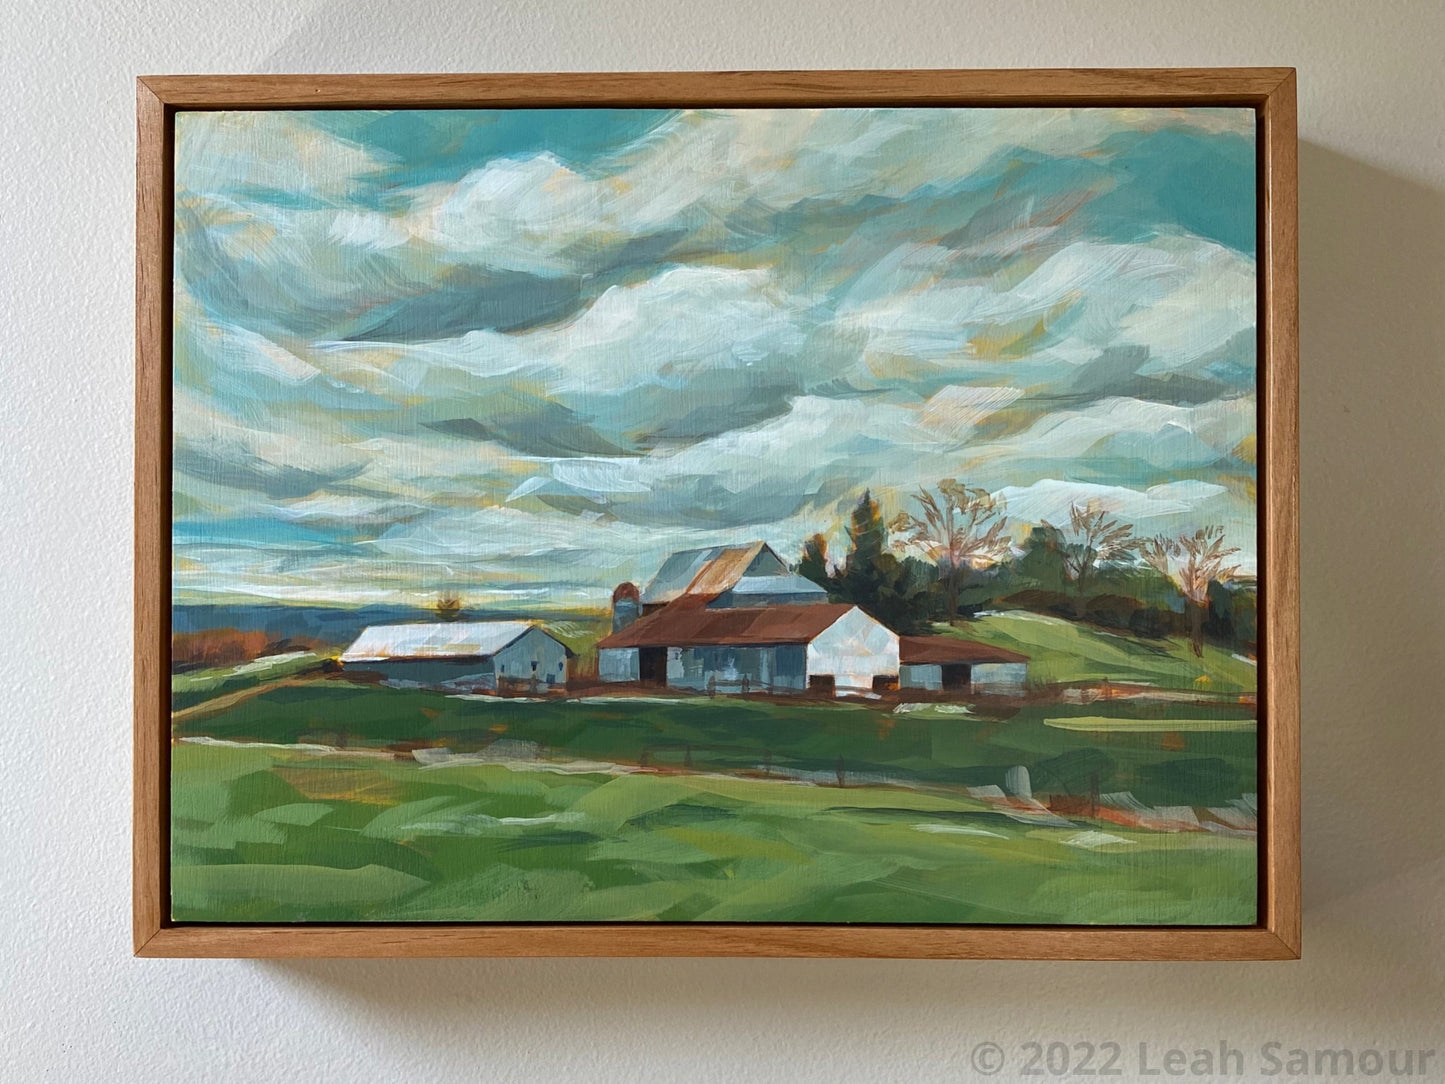 9x12 original framed art for sale featuring a Barn On The Way To Beach Acrylic Painting Wood Panel